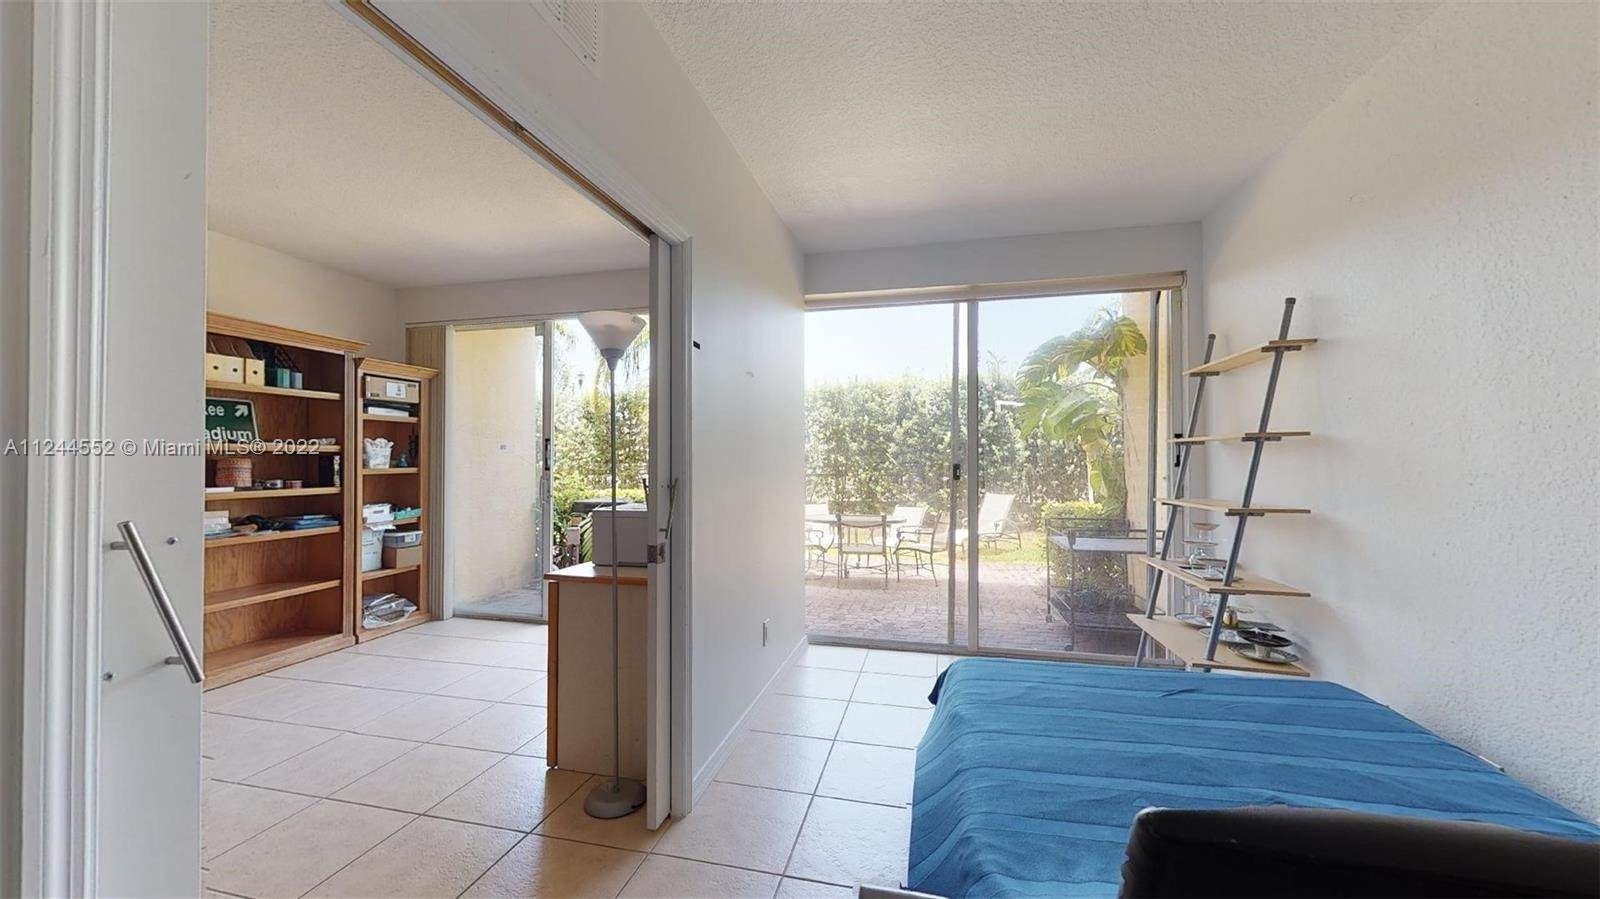 21. Townhouse for Sale at Aventura, FL 33180